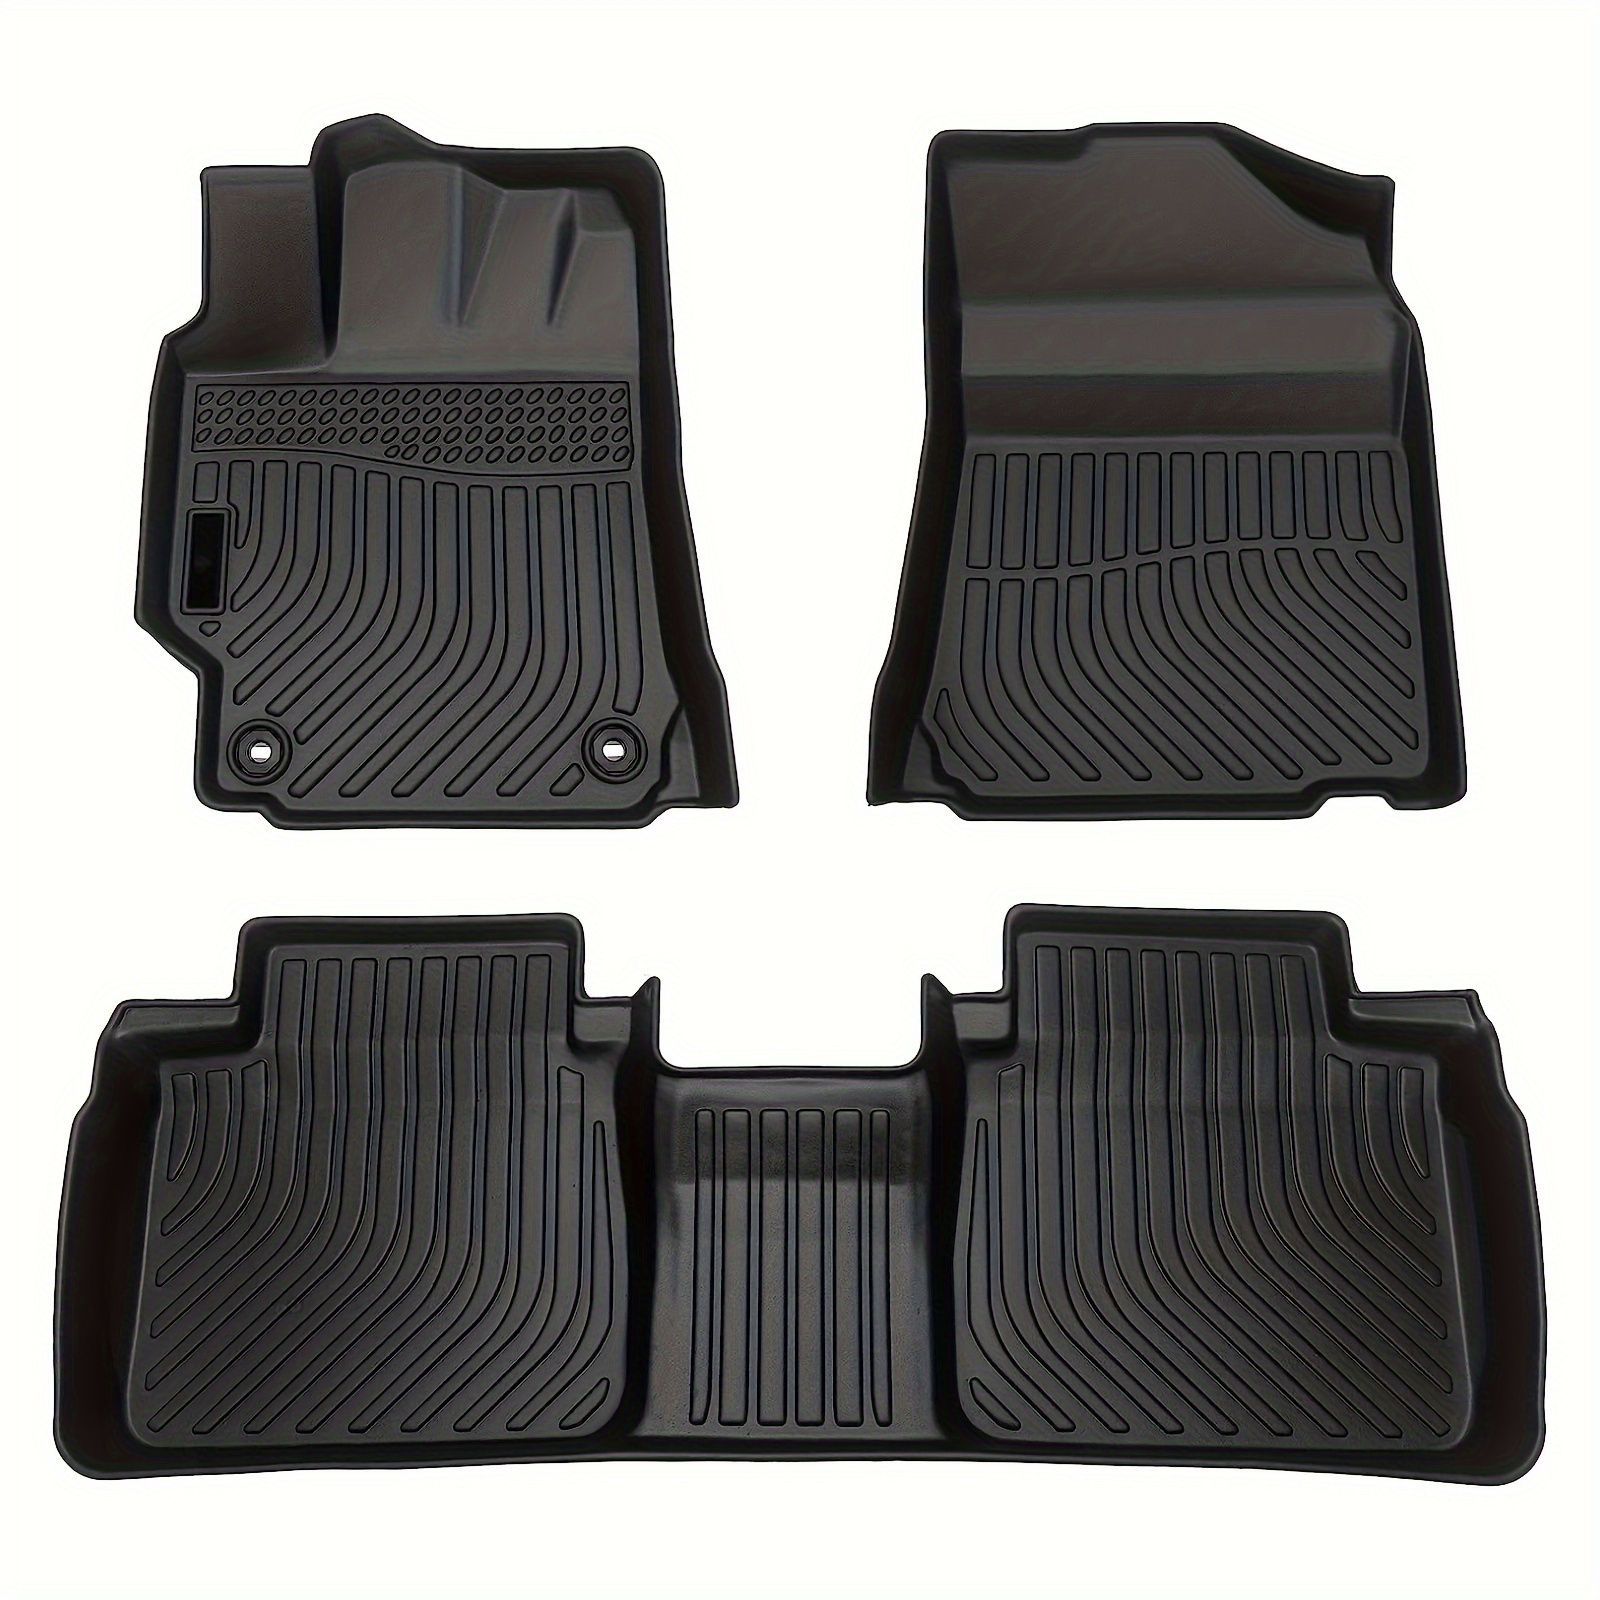 

Floor Mats, Fit For 2012-2017 Camry All Weather Protection Custom Full Set Liners Include 1st And 2nd Row Front & Rear Black Car Liners